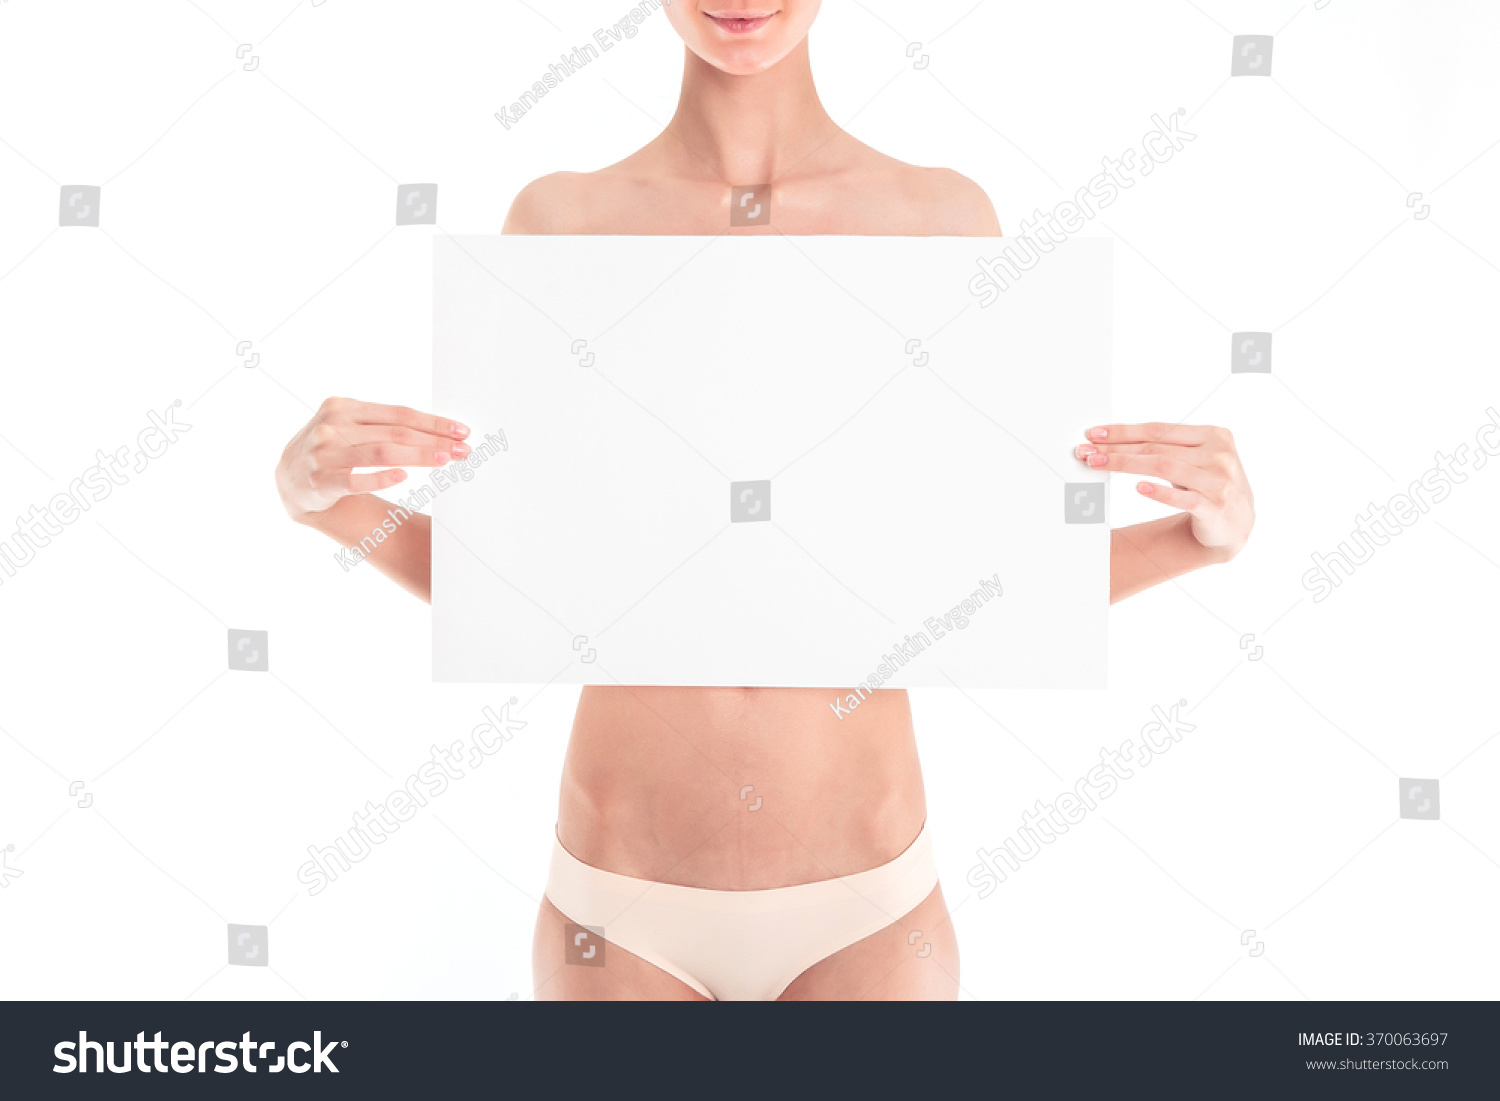 Sexy Naked Girl Poster Clean Skin Shutterstock